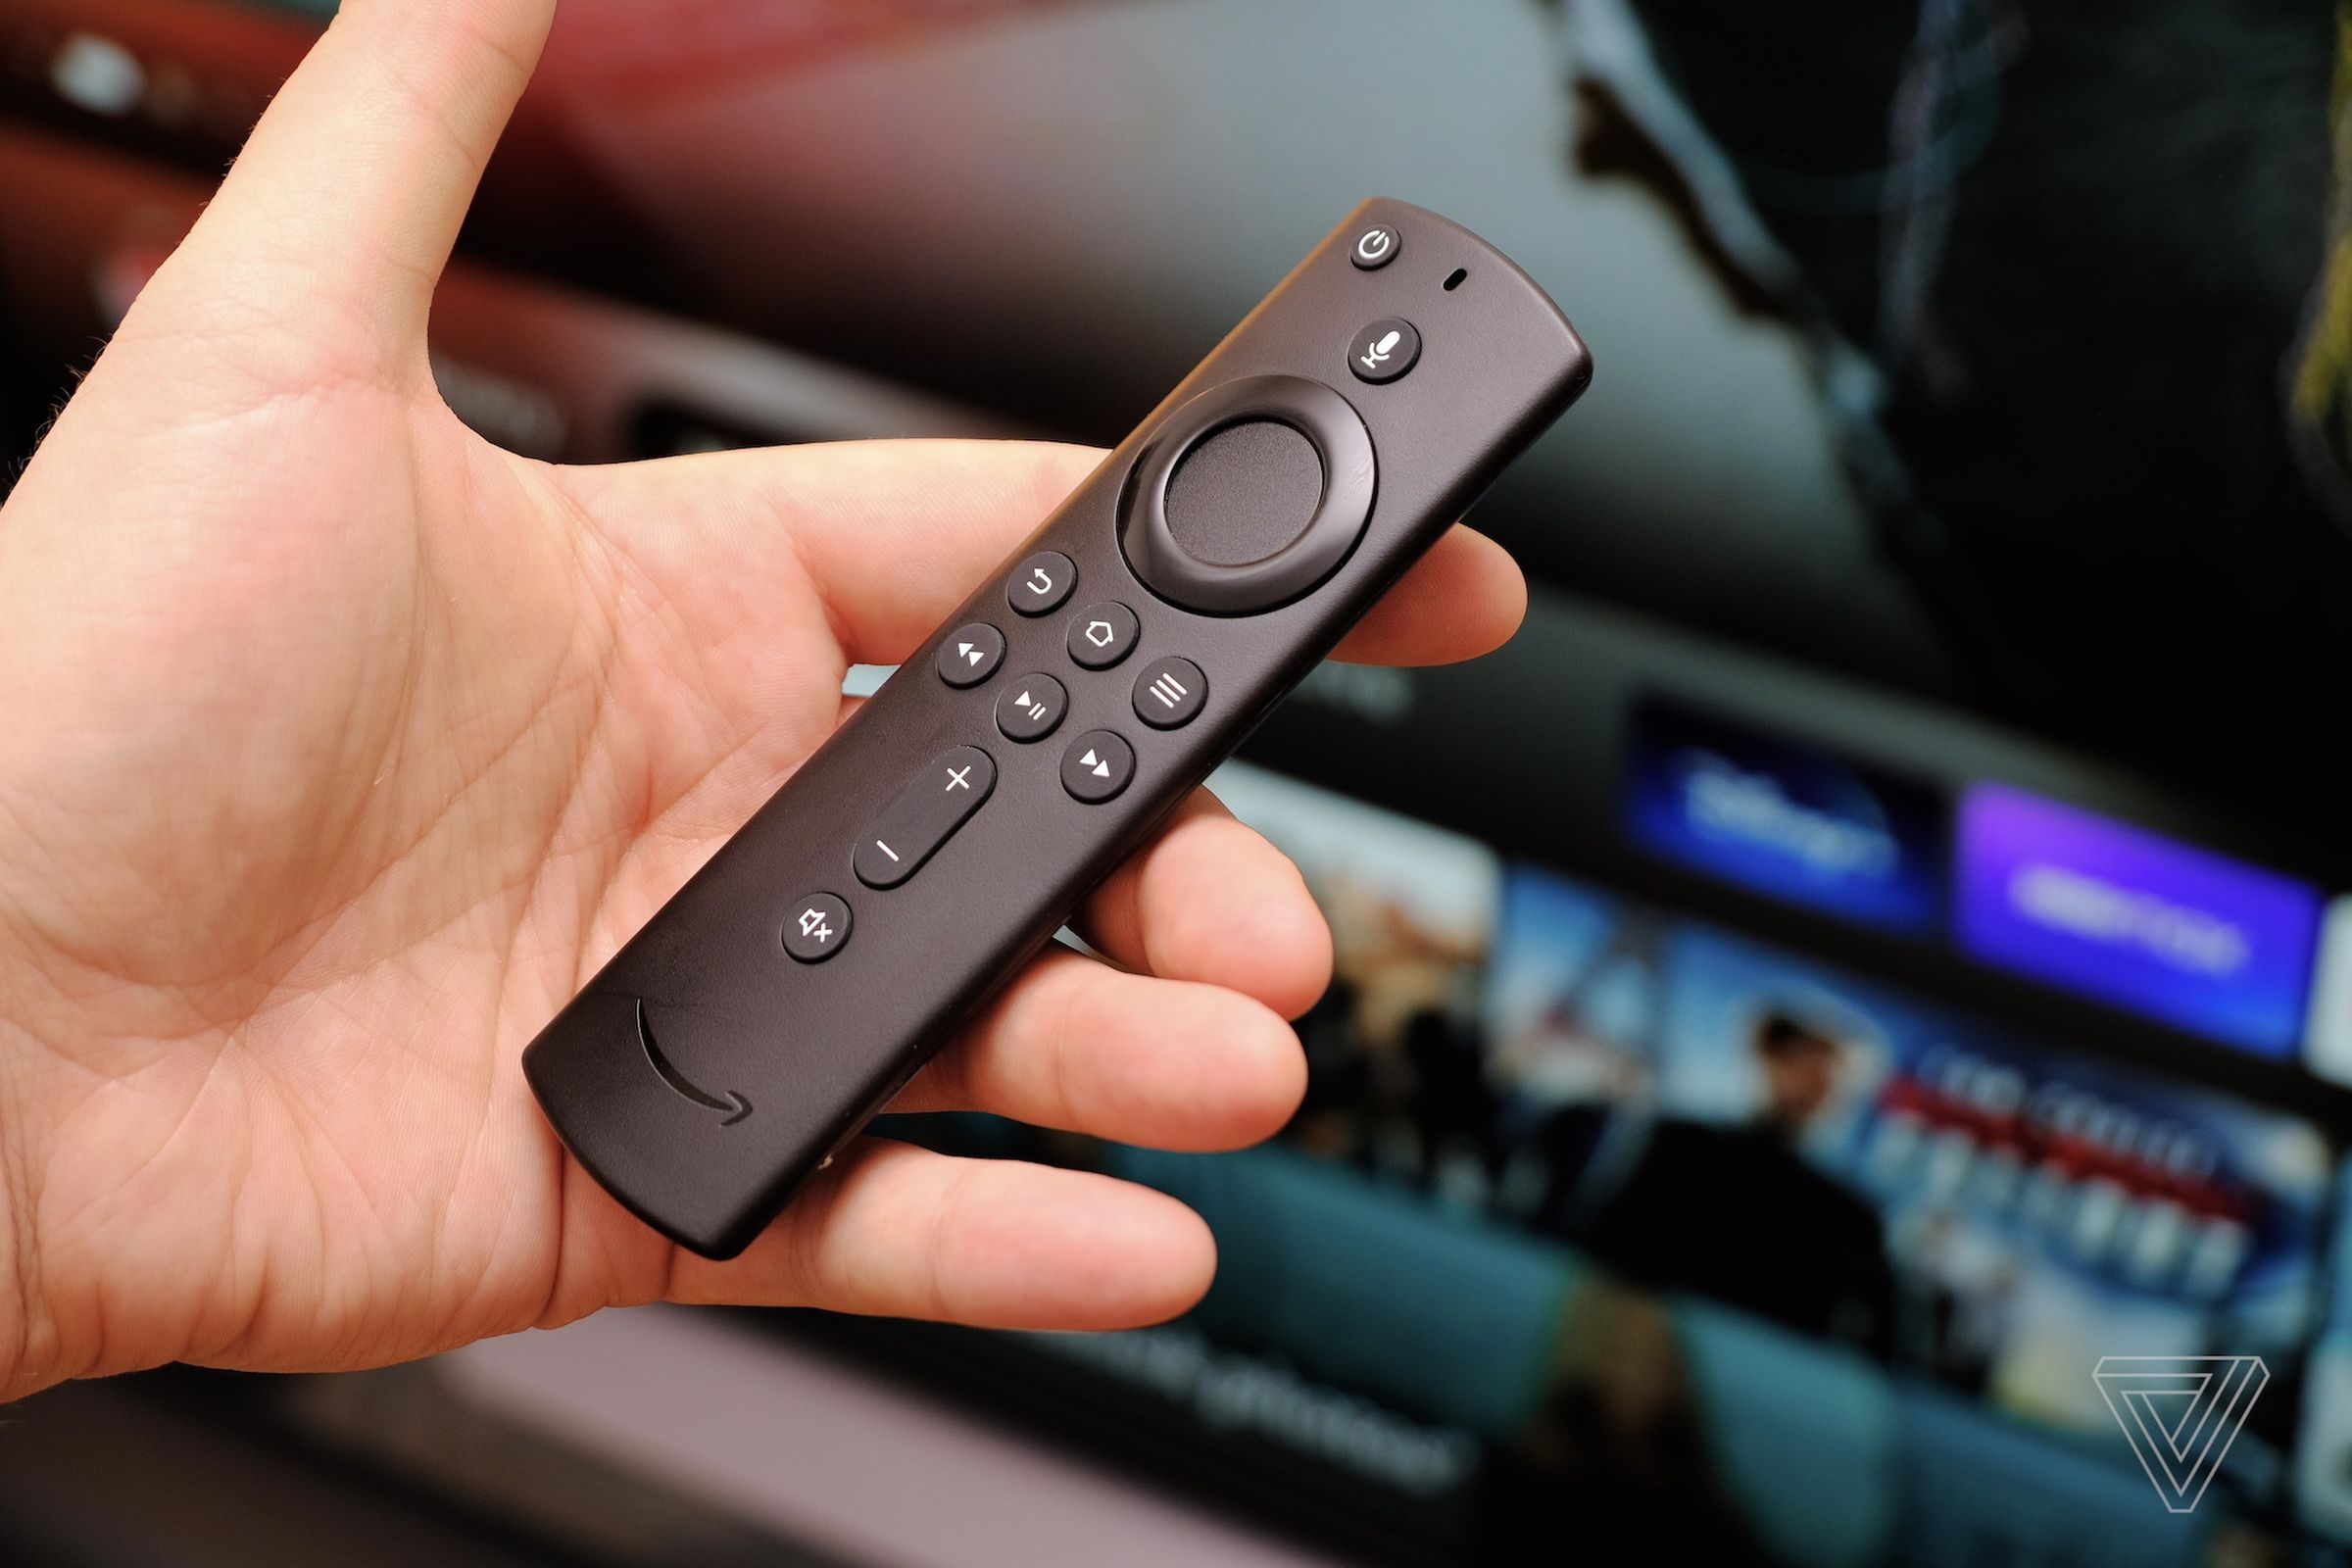 The Fire TV Stick’s remote has buttons for controlling your TV power and volume.